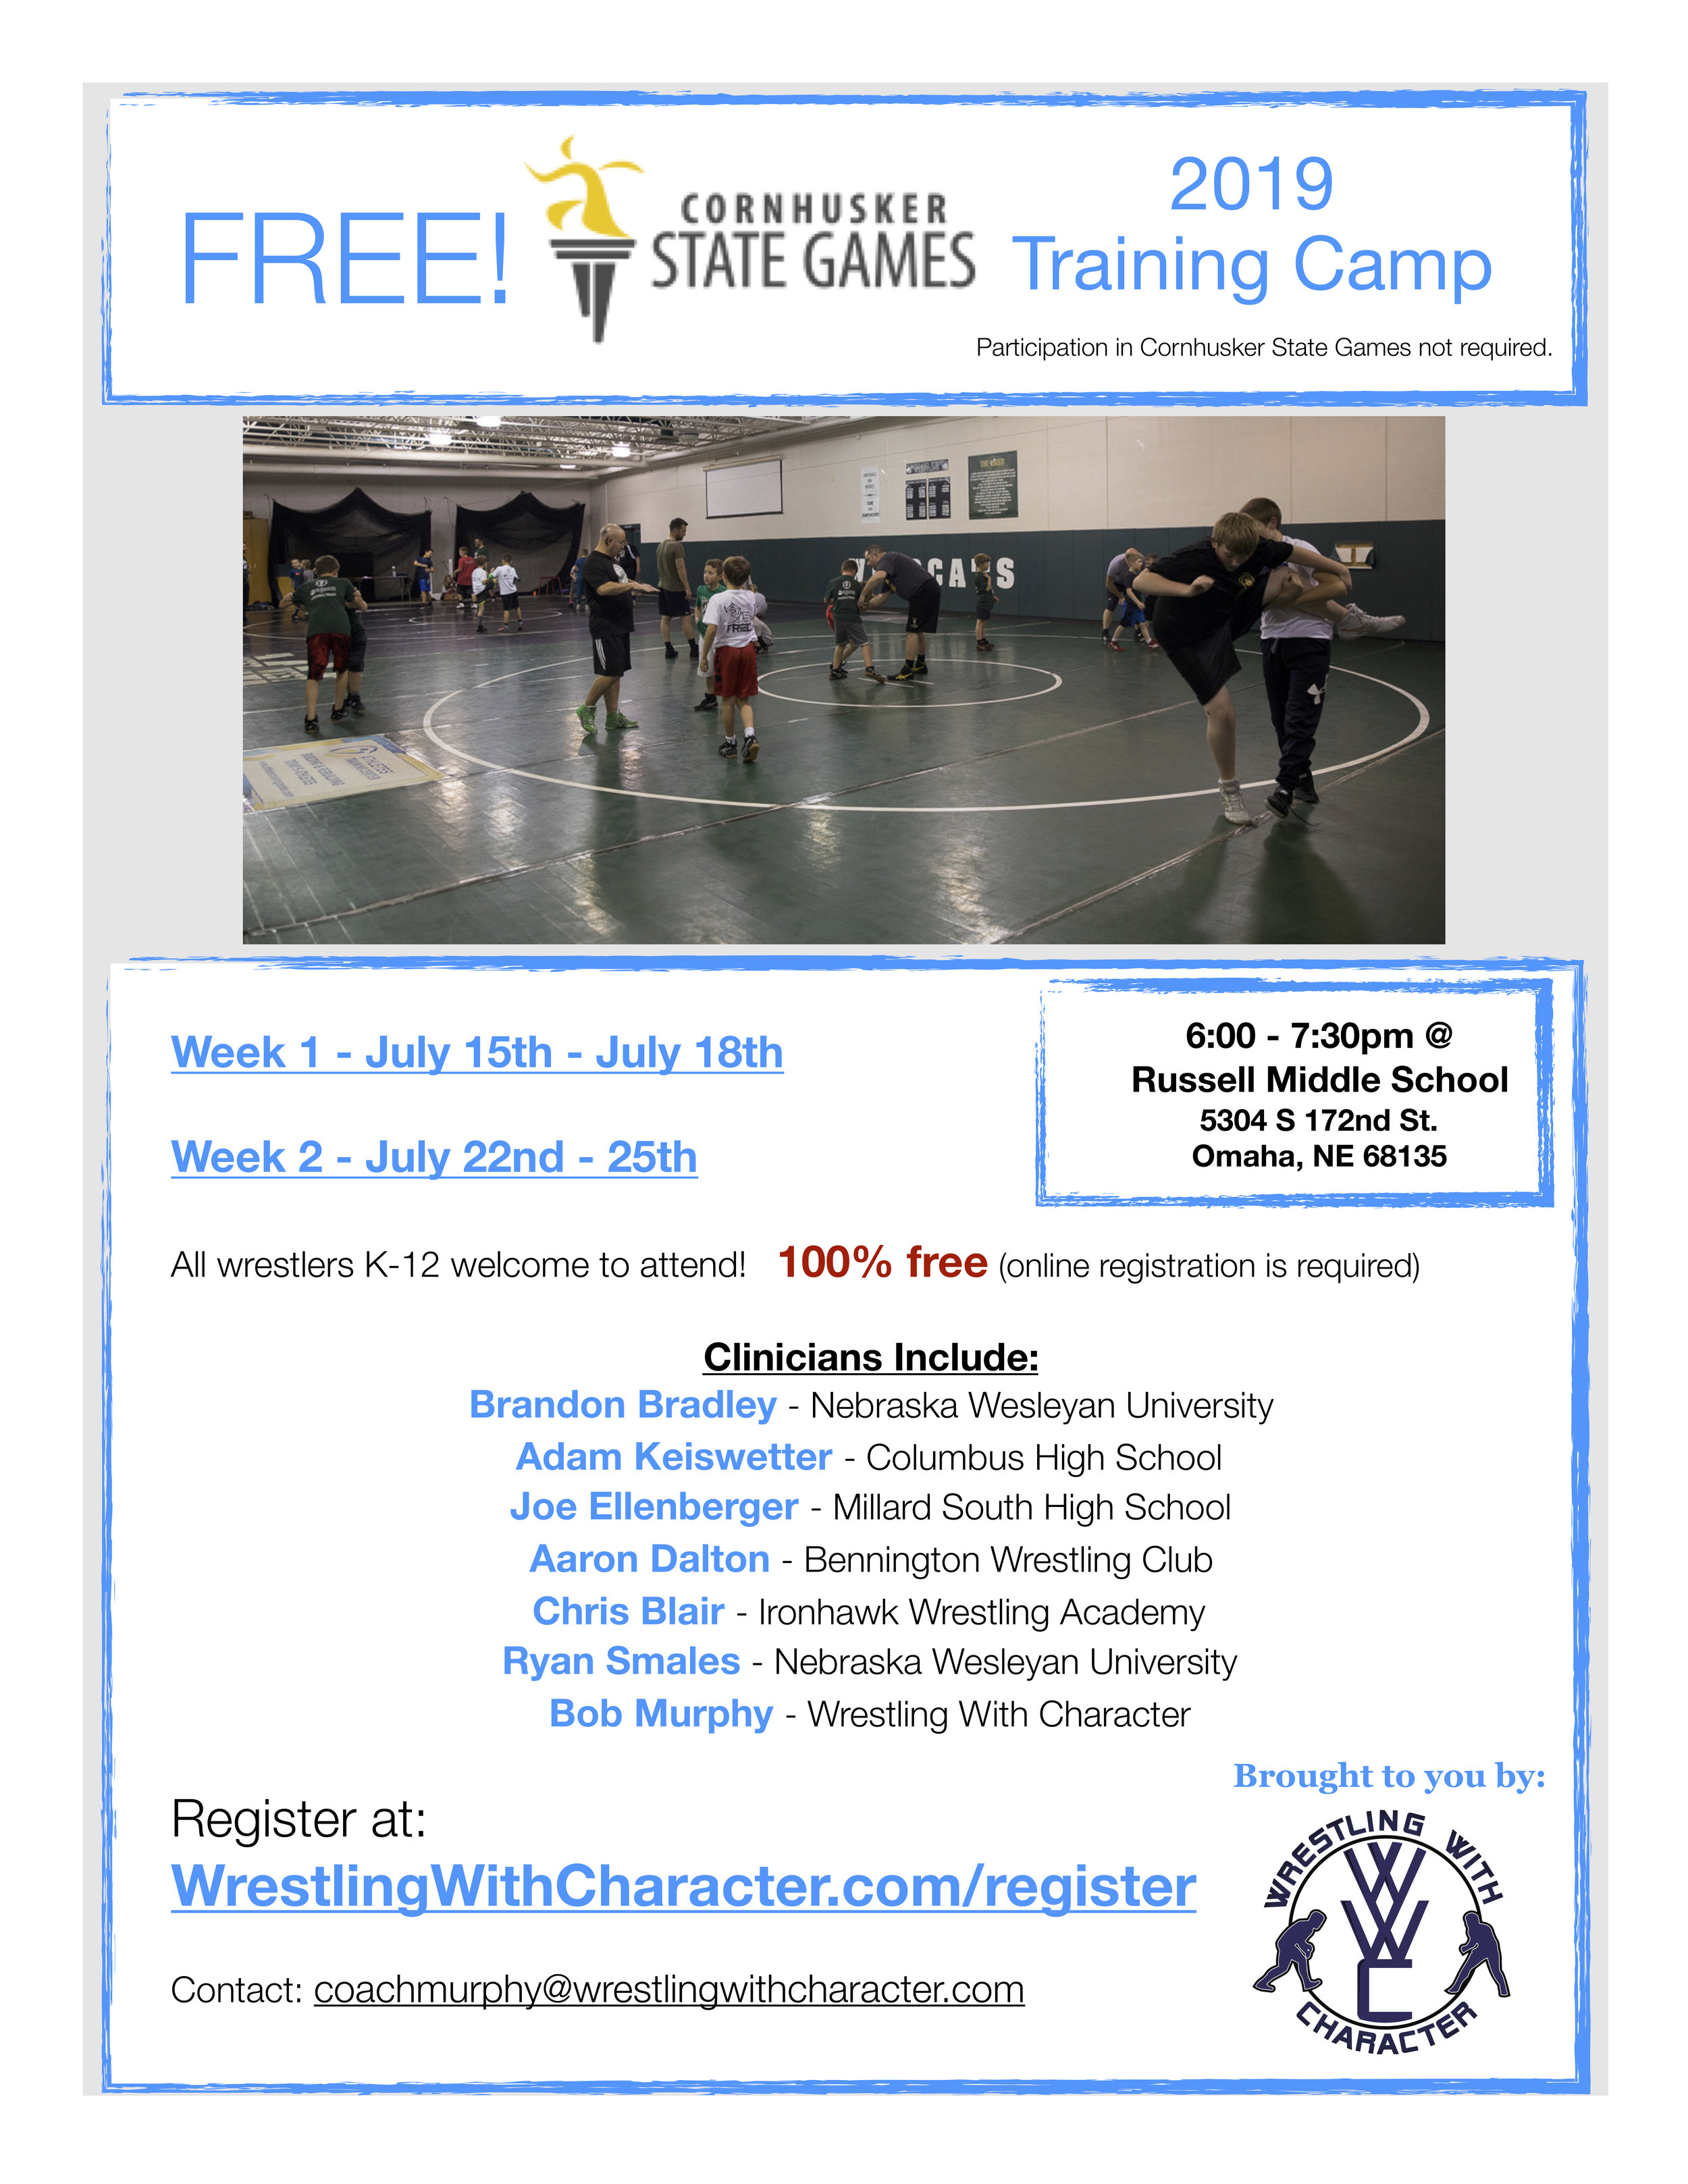 FREE Summer Clinic! — WRESTLING WITH CHARACTER Wrestling With Character